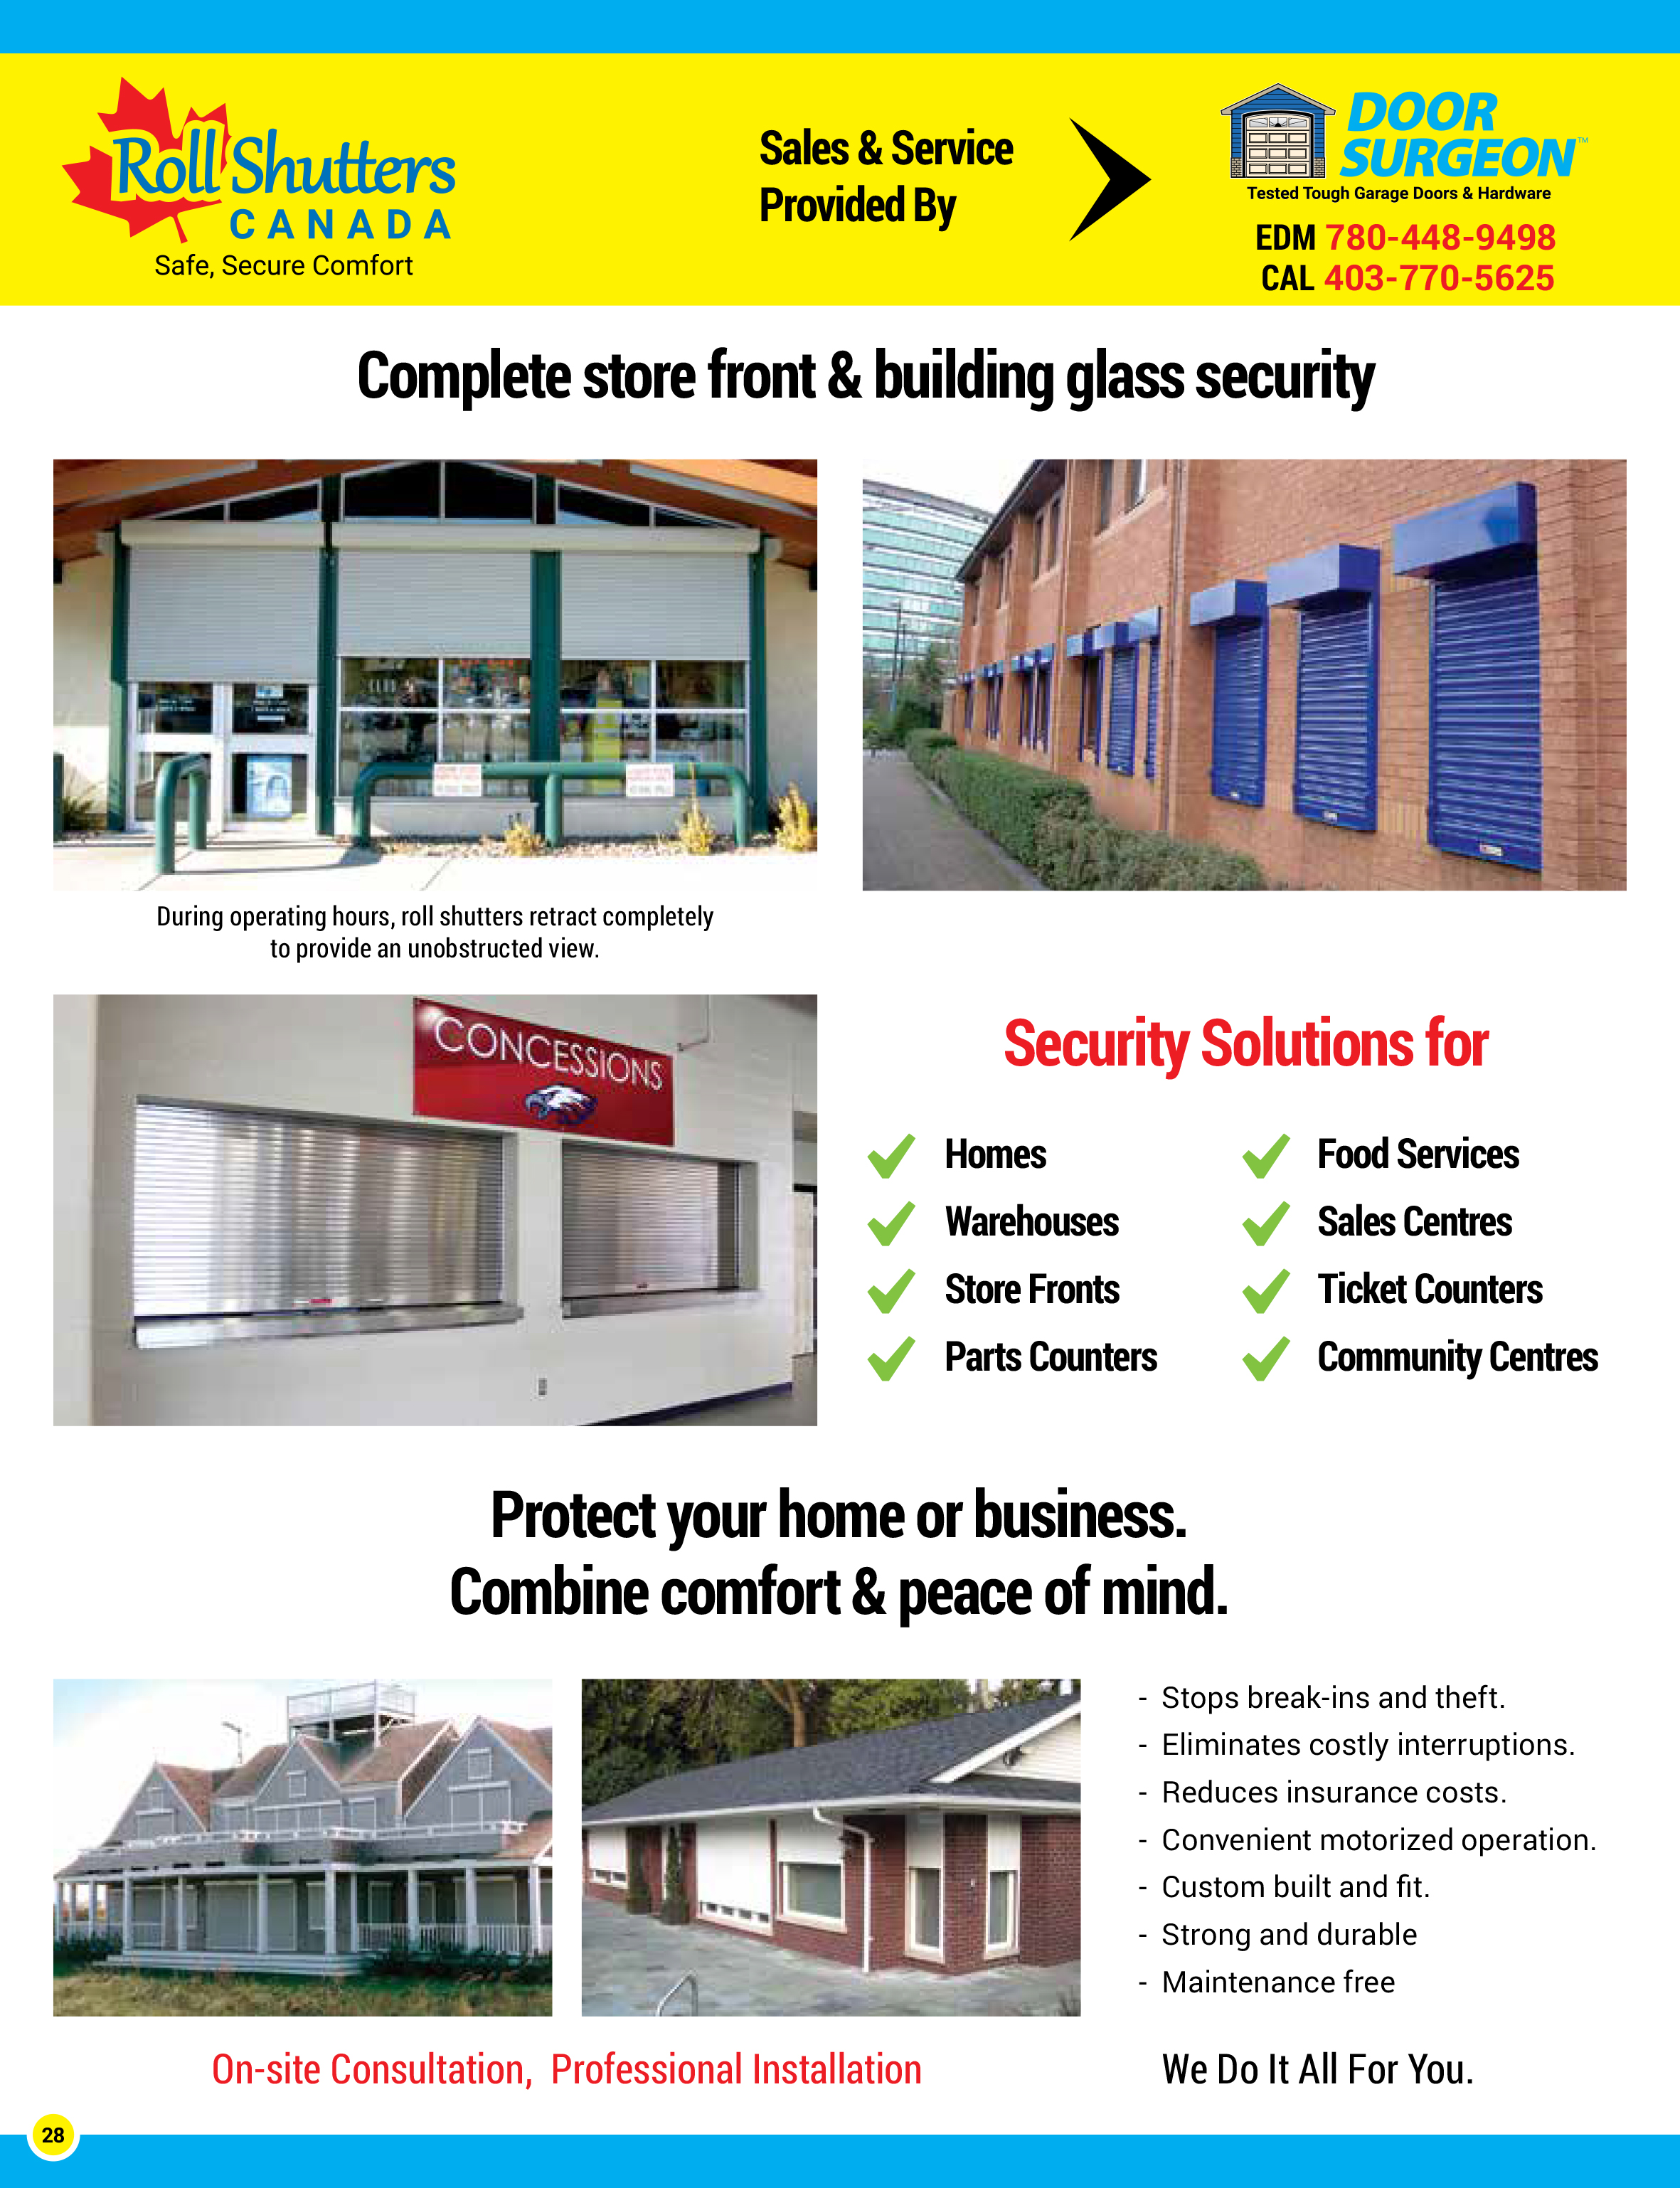 Complete store-front and building glass security provided with Roll Shutters.